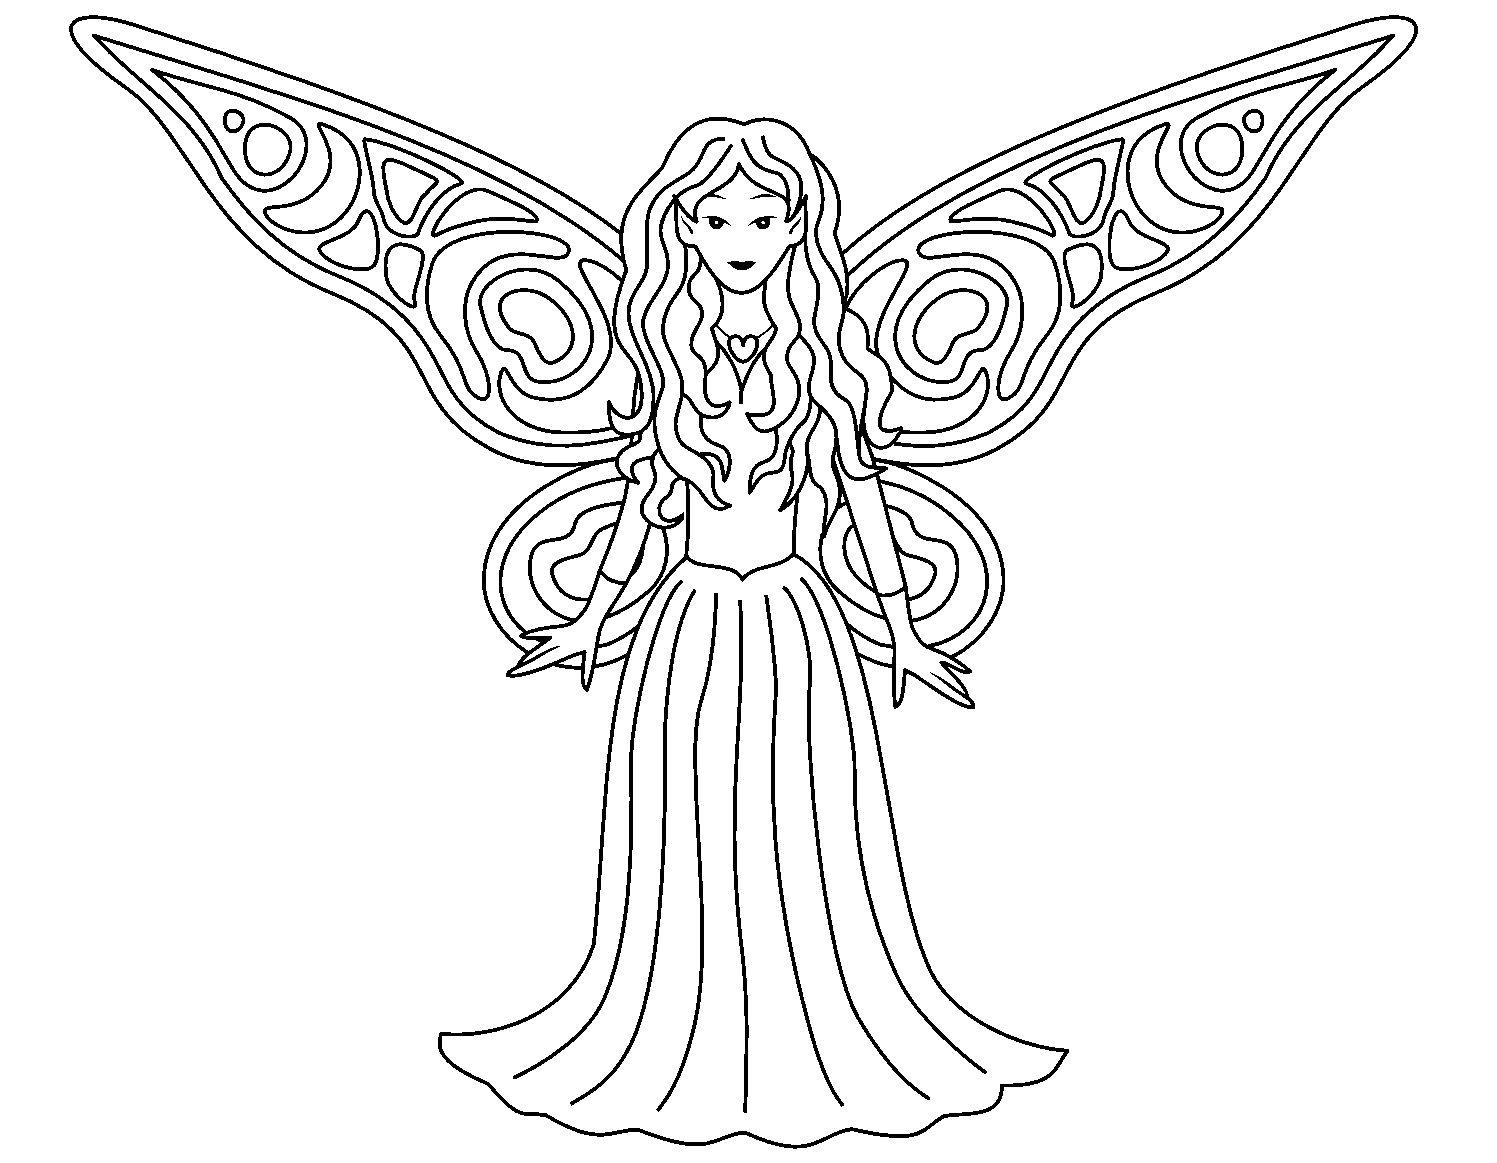 Coloring Pages Of Fairies (19 Pictures) - Colorine.net | 14654